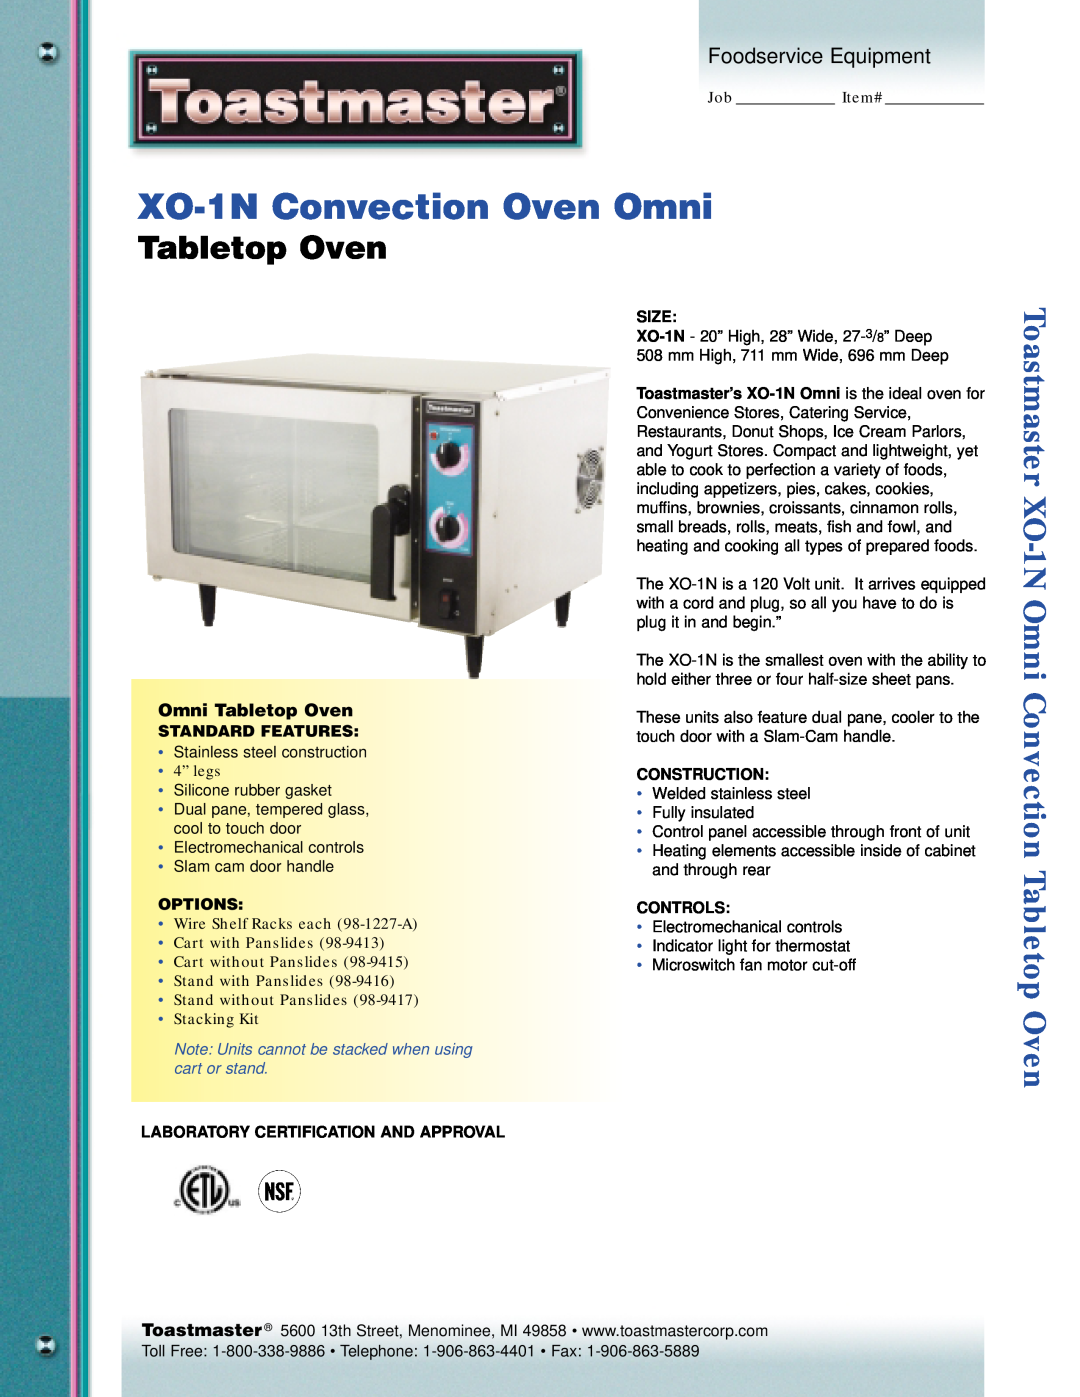 Toastmaster XO-1N manual Convection Oven, Installation and Operation Instructions, Omni Tabletop Oven, Models 